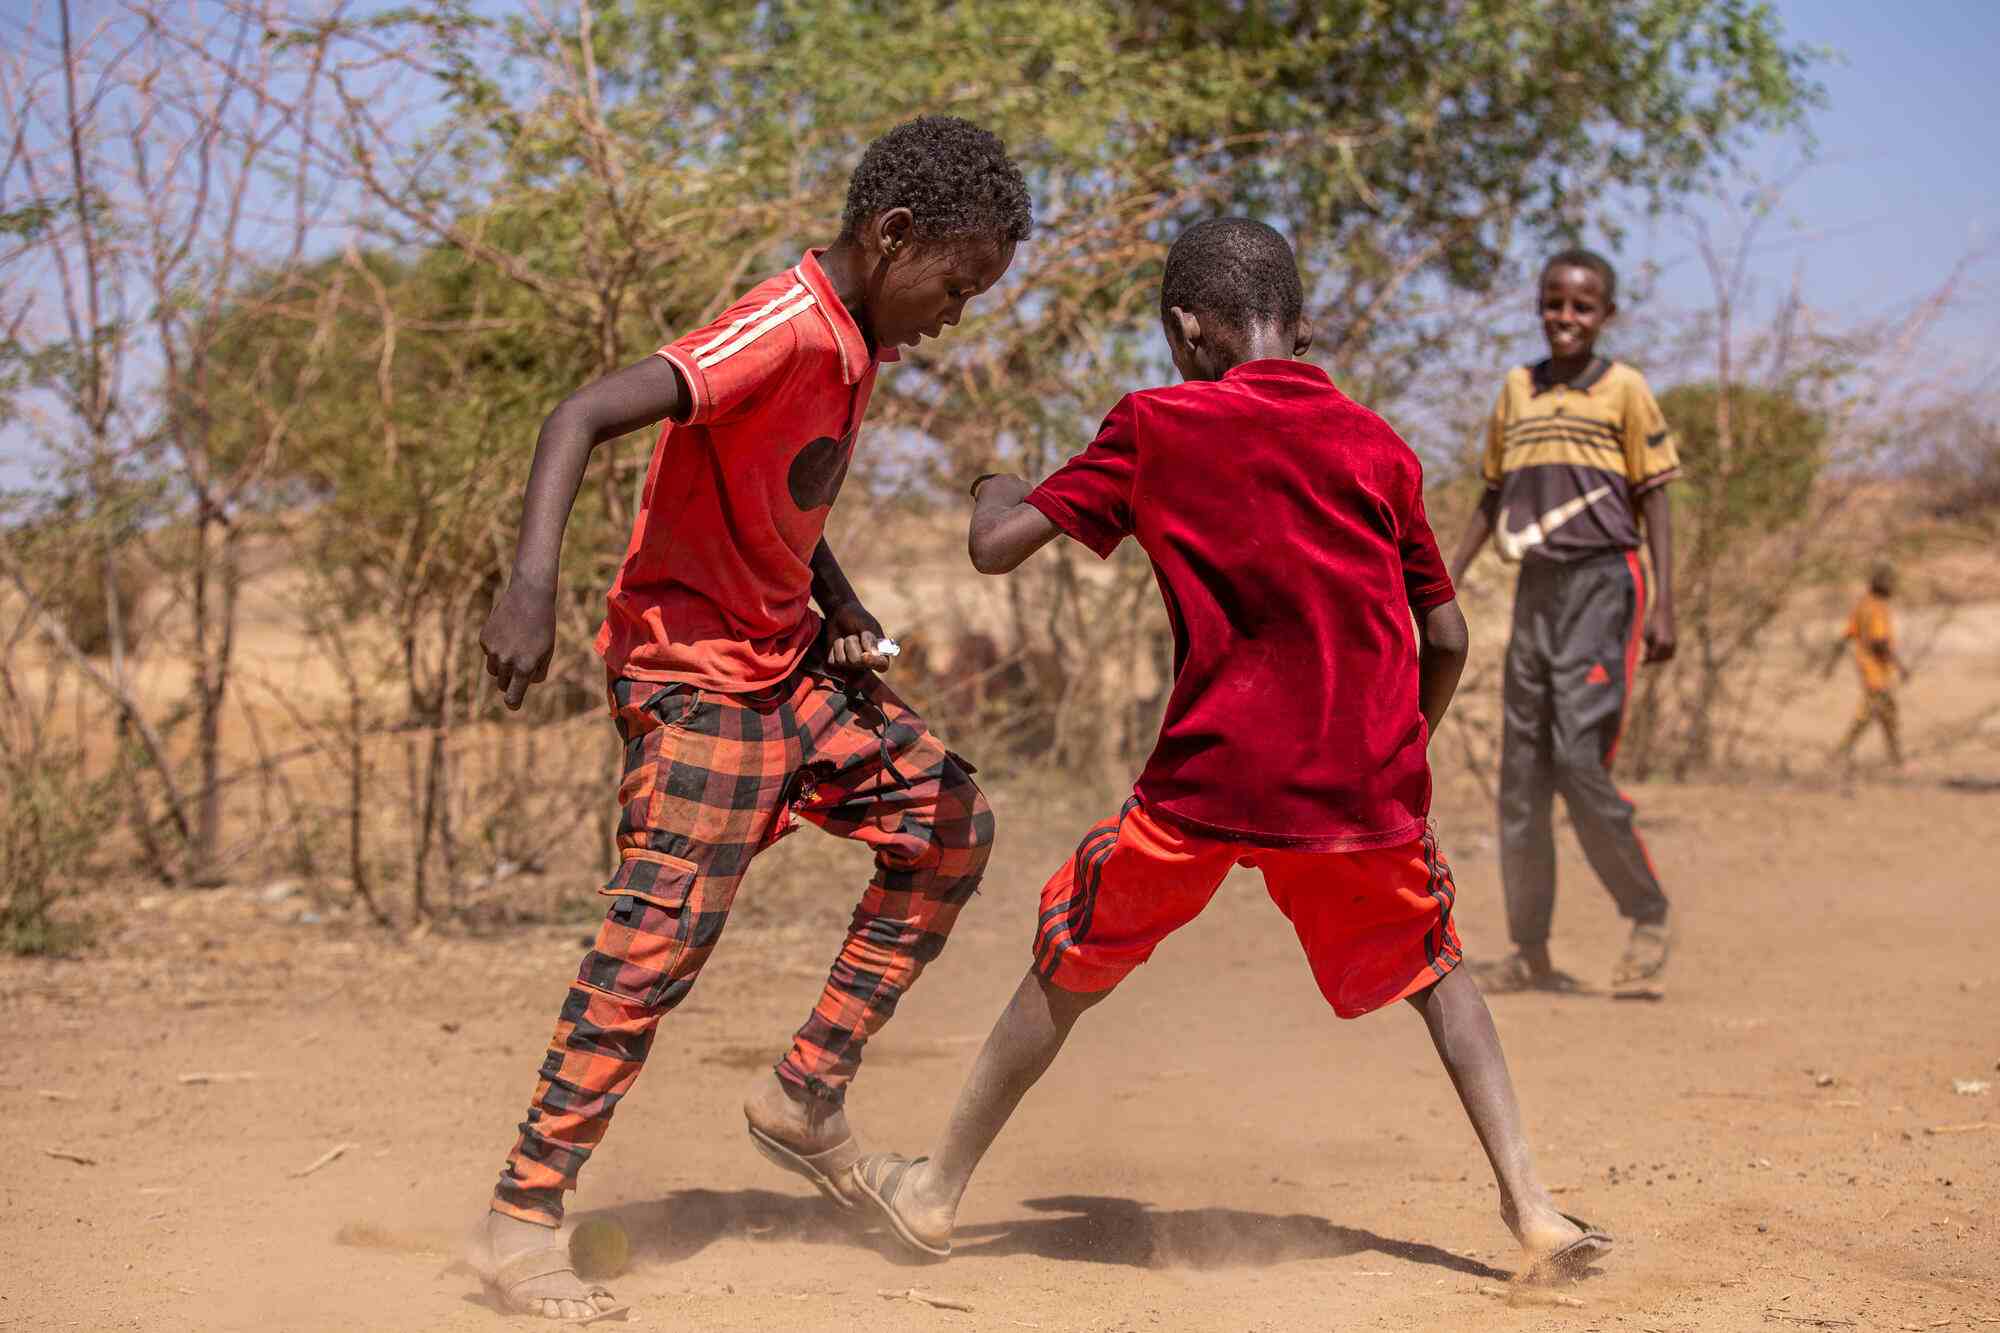 In Somalia, two boys play soccer together with a small ball. 